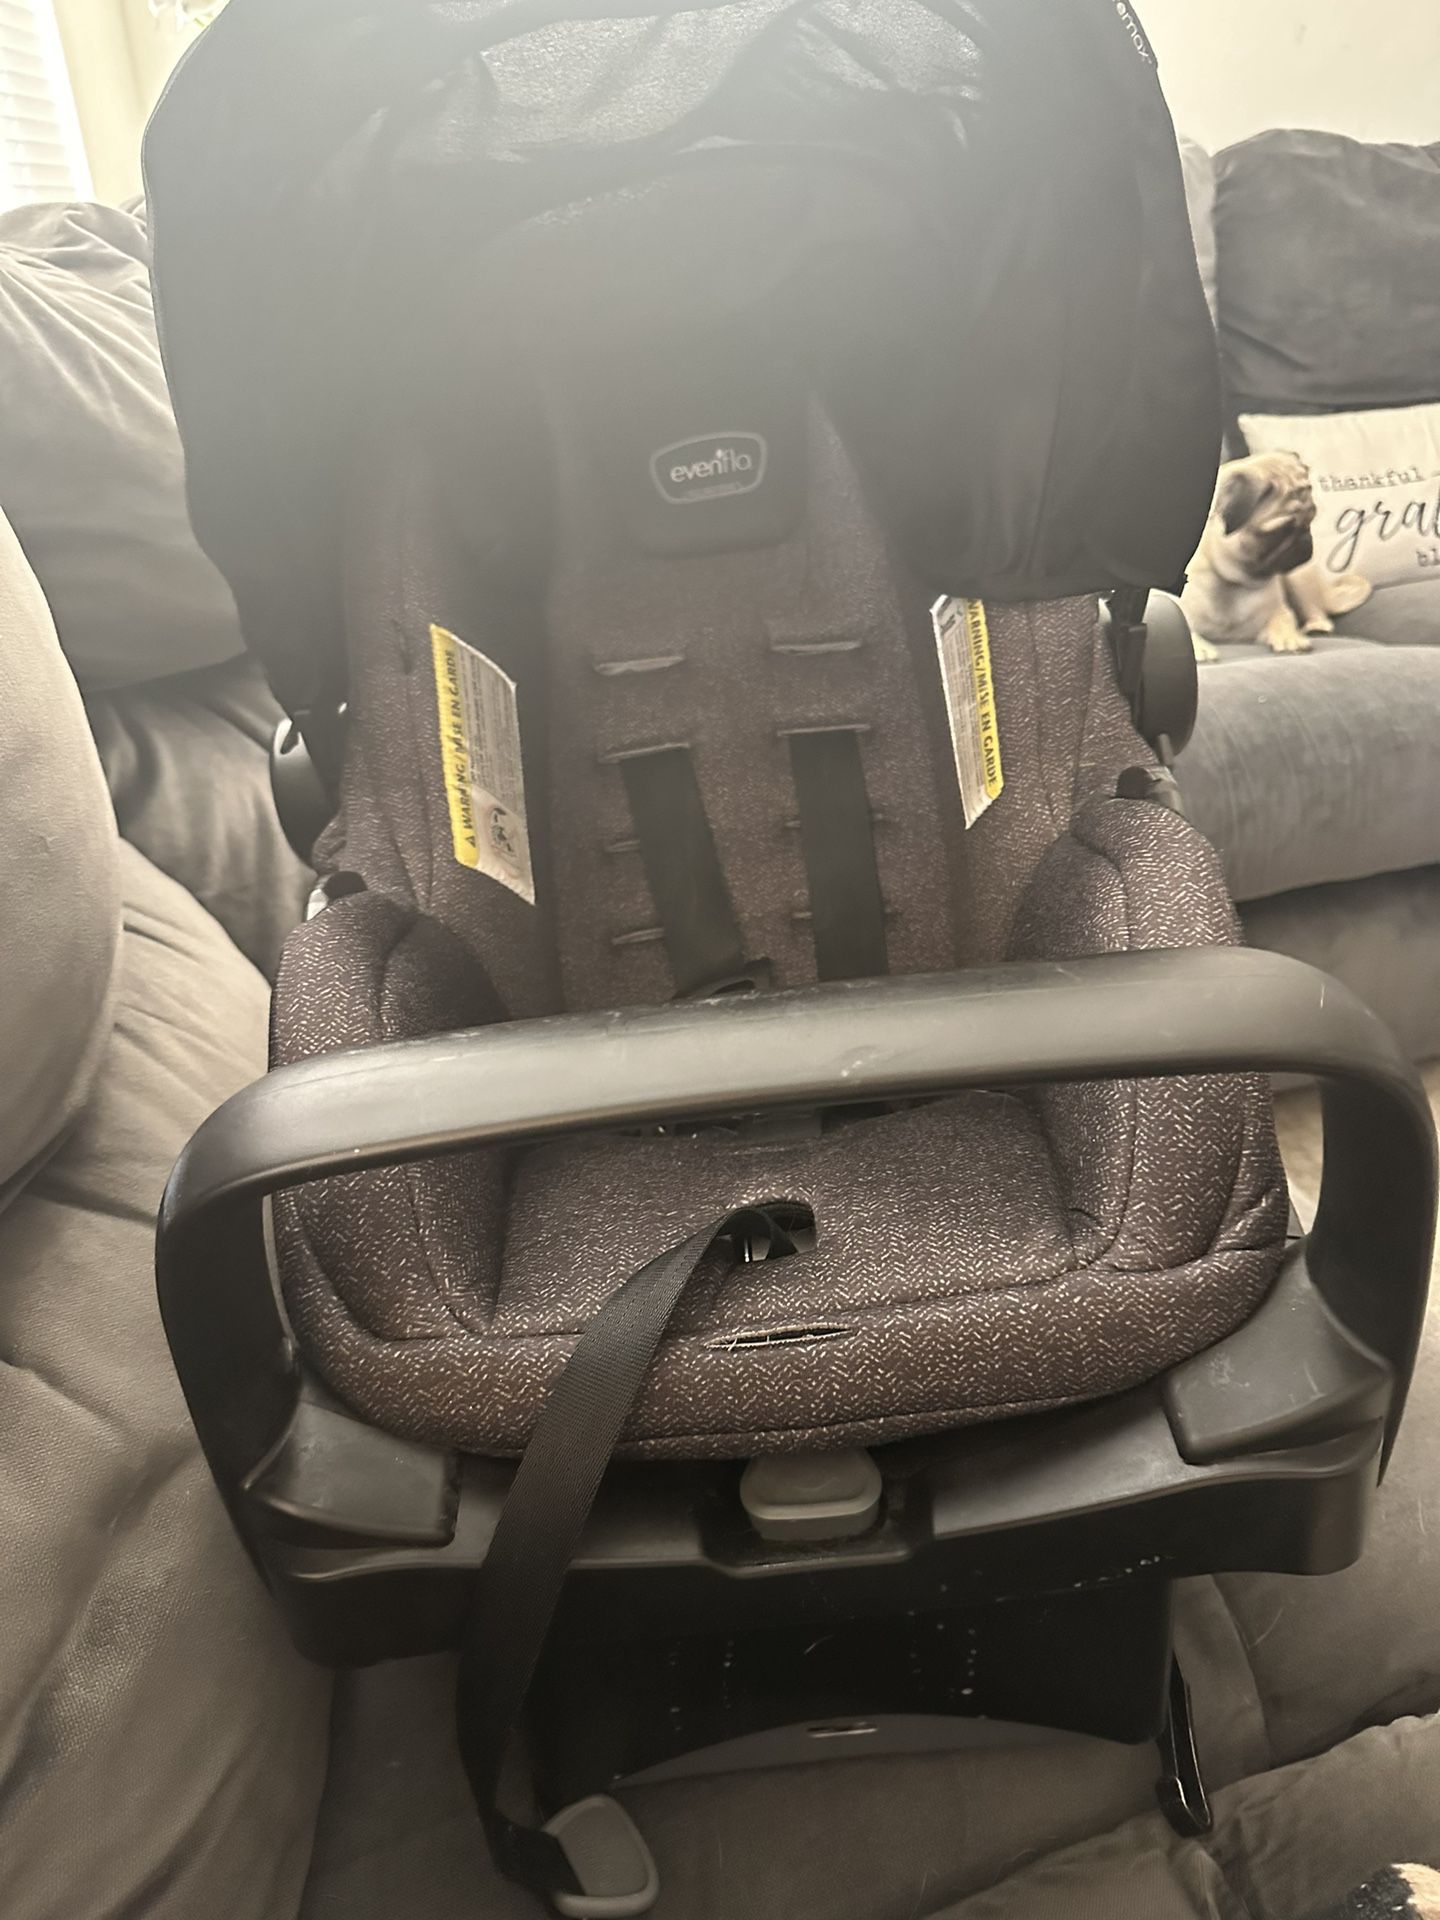 Evenflo infant car seat With base